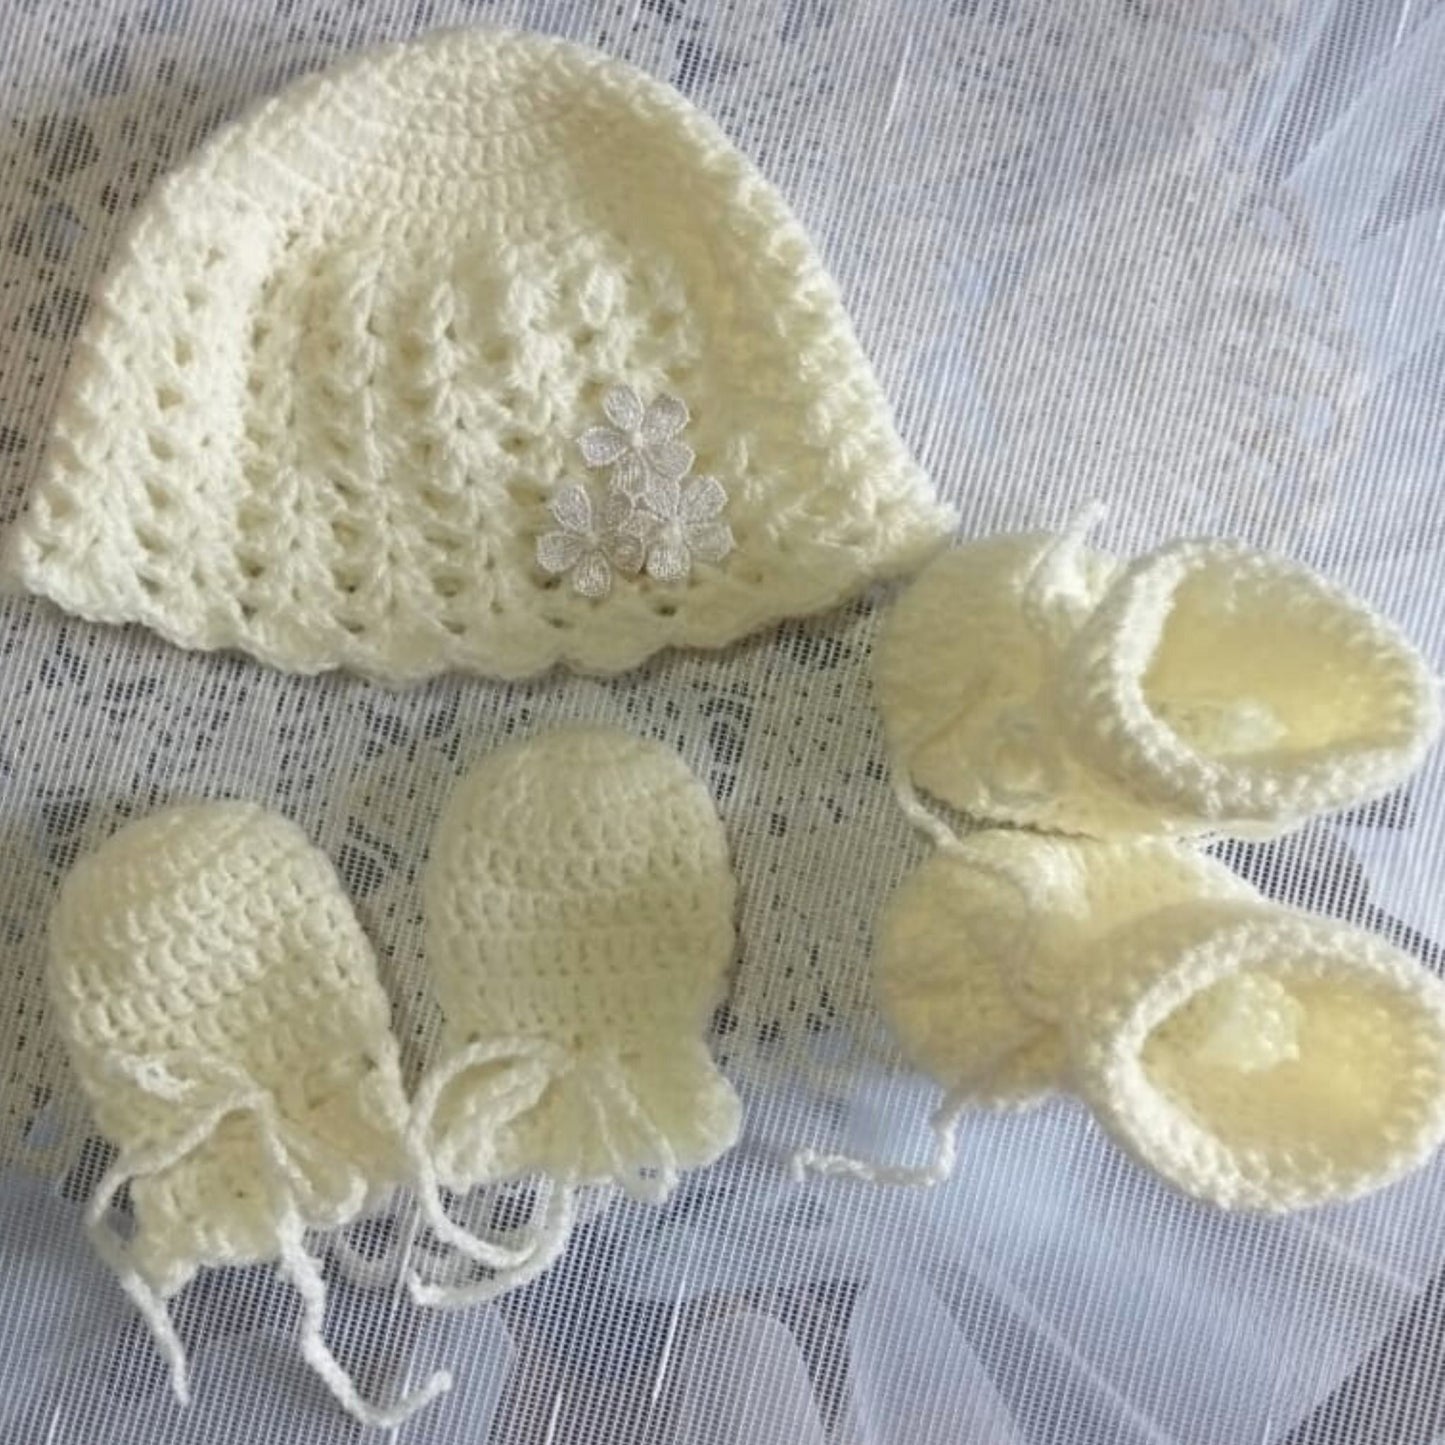 Crochet / Knitted Baby Hat, Socks, Mittens Set 0 to 3 months